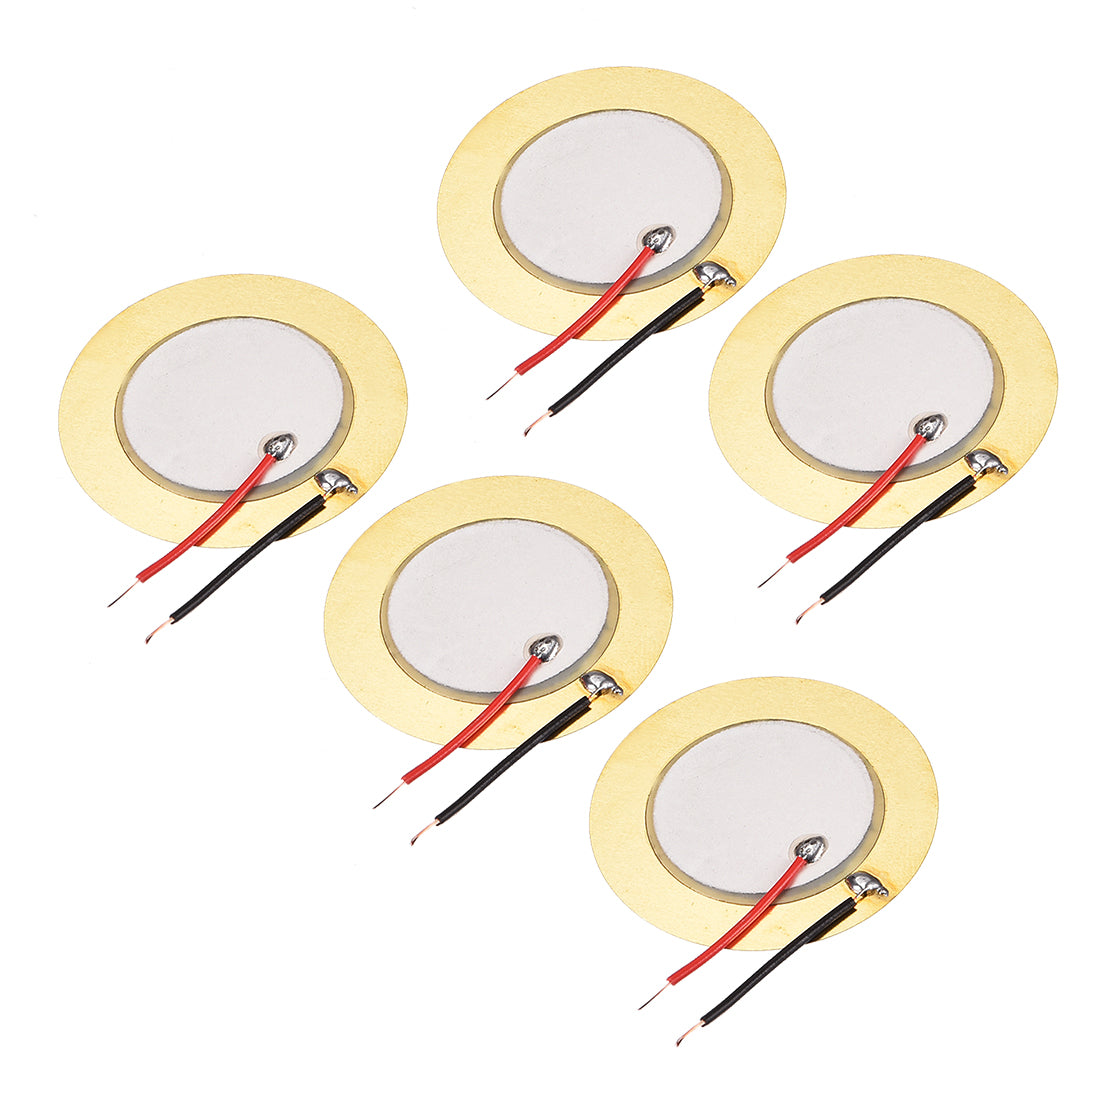 uxcell Uxcell 5 Pcs Piezo Discs 35mm Acoustic Pickup Transducer Microphone Trigger Buzzer Drum Guitar